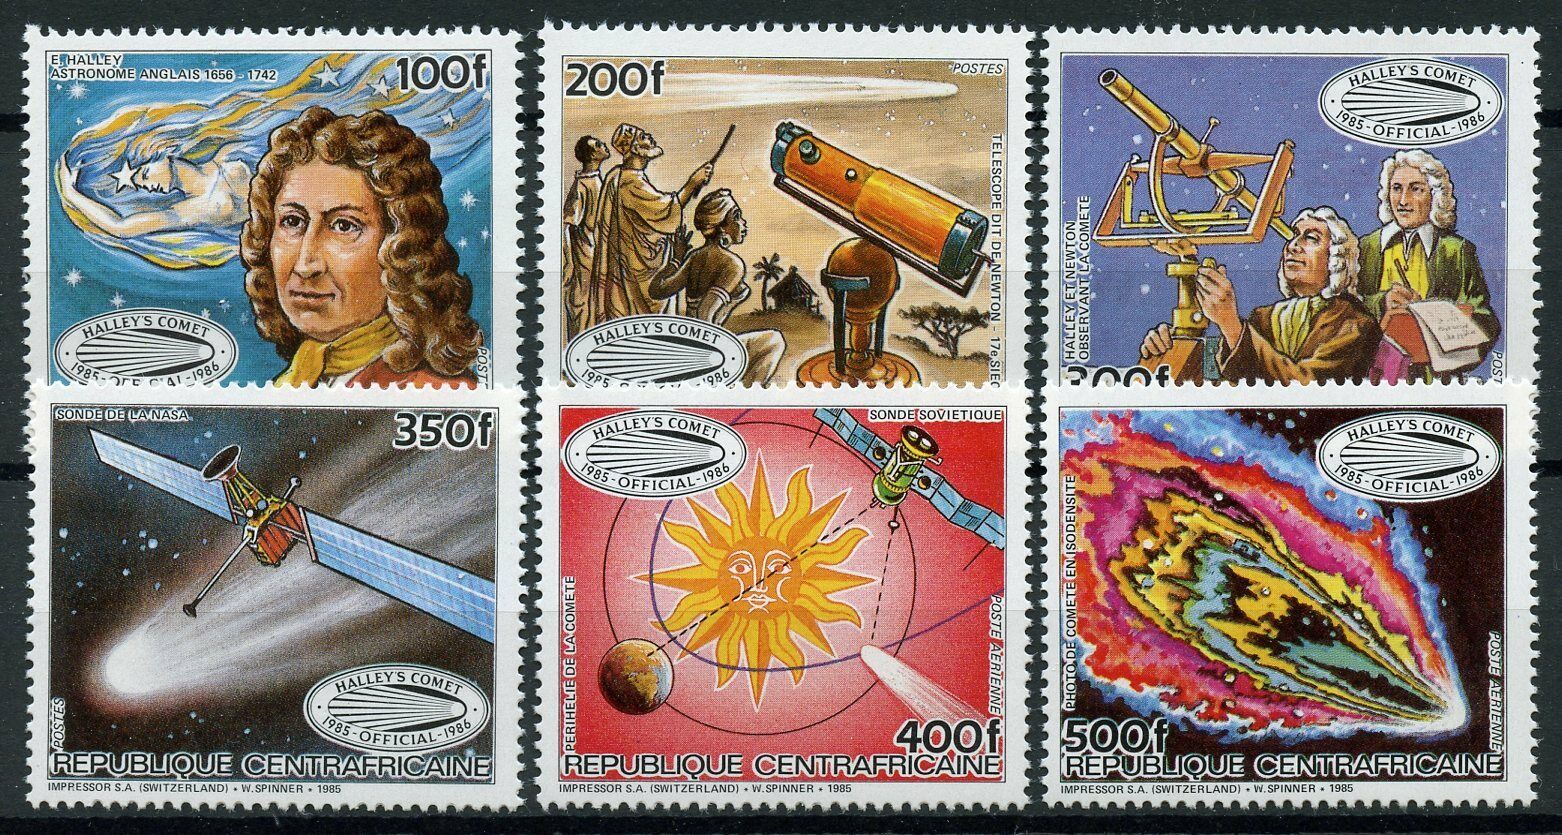 Central African Rep 1985 MNH Halleys Comet Newton 6v Set Astronomy Space Stamps